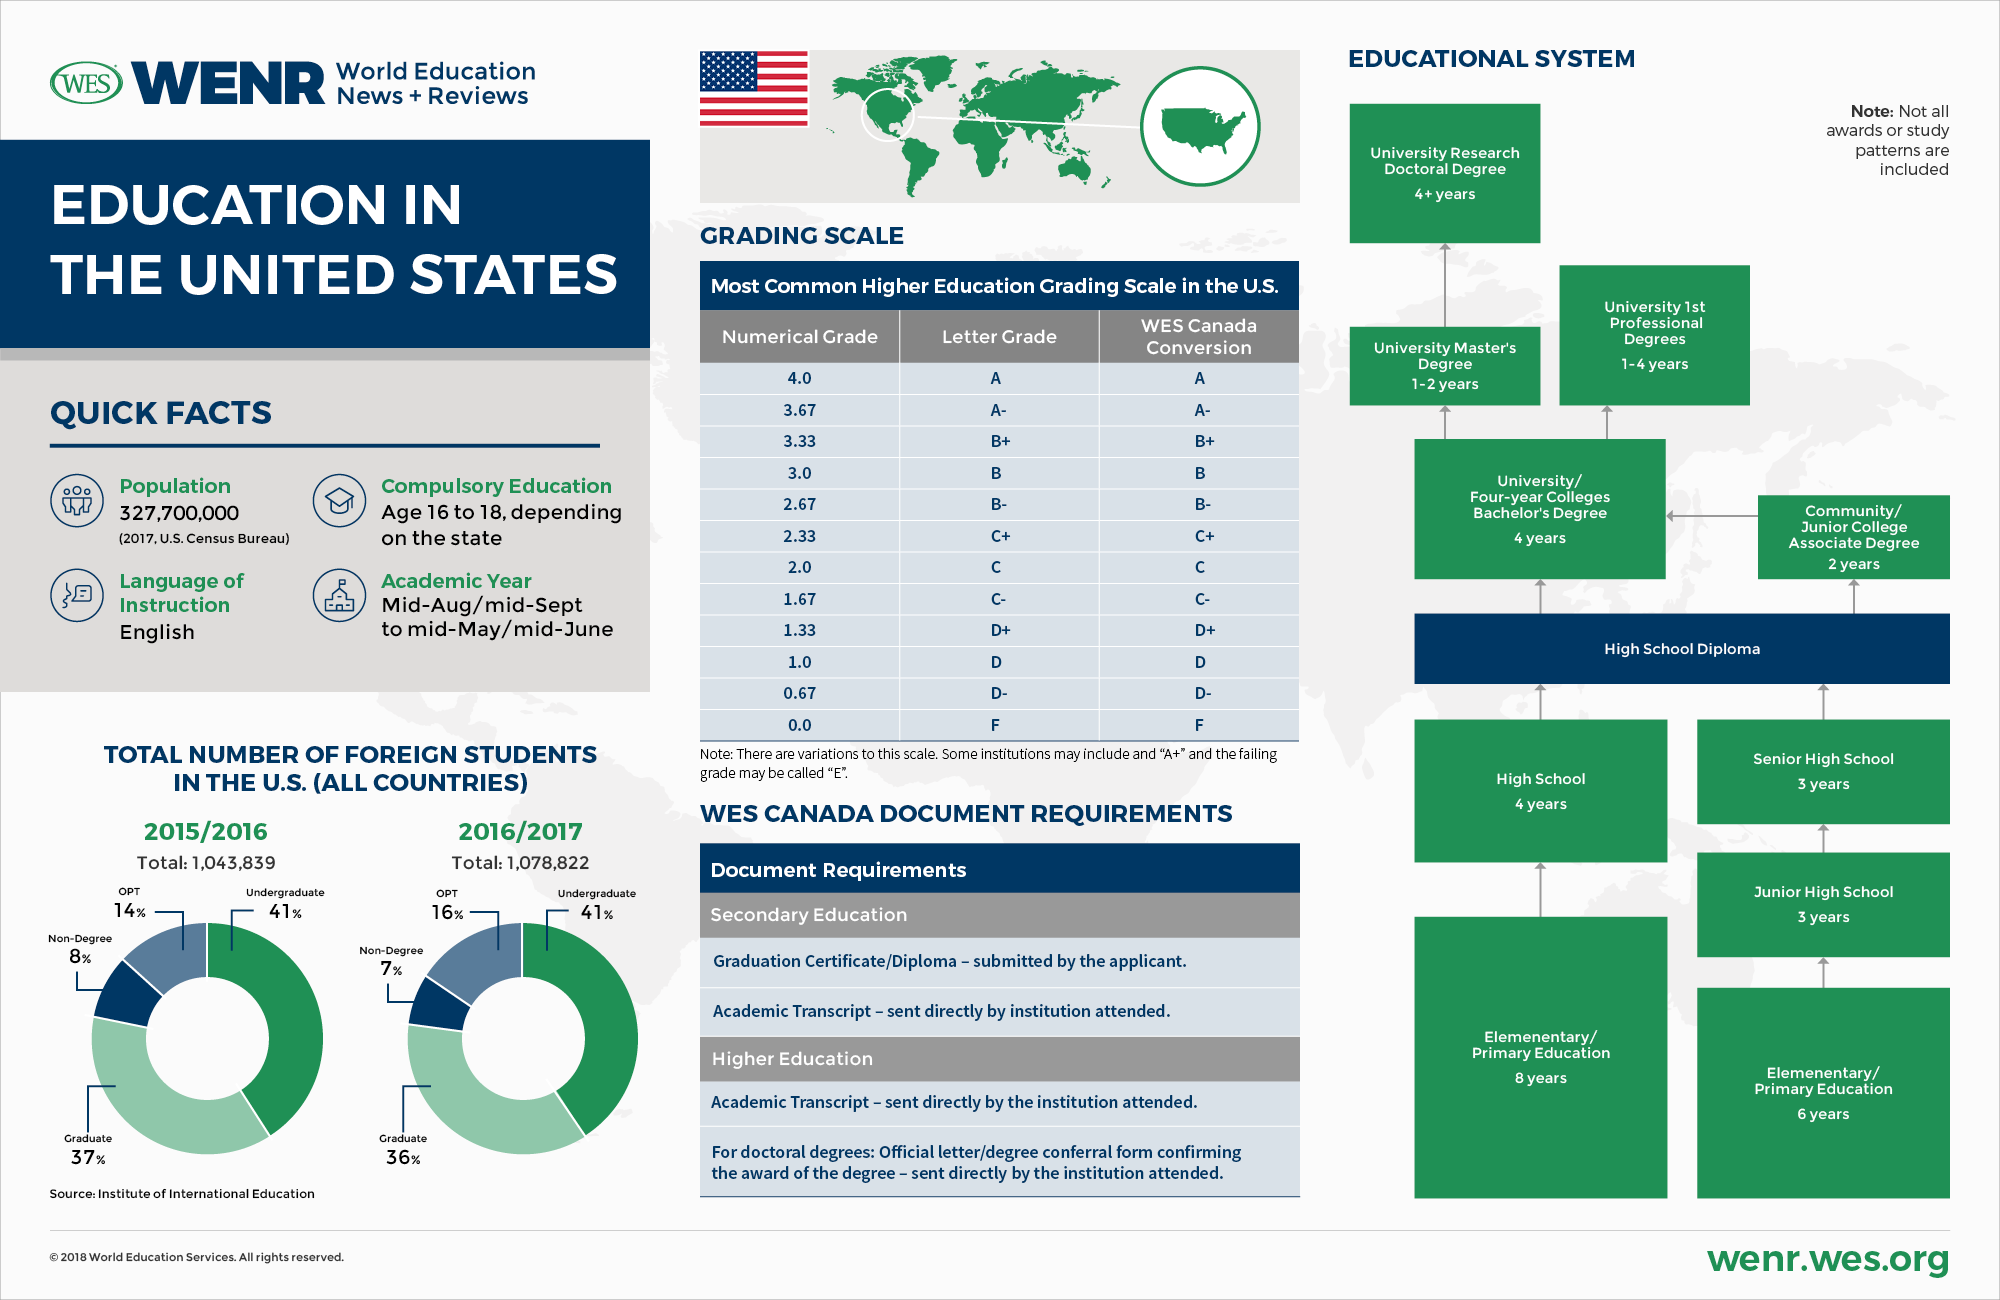 An infographic with fast facts on the educational system and international student mobility in the U.S.